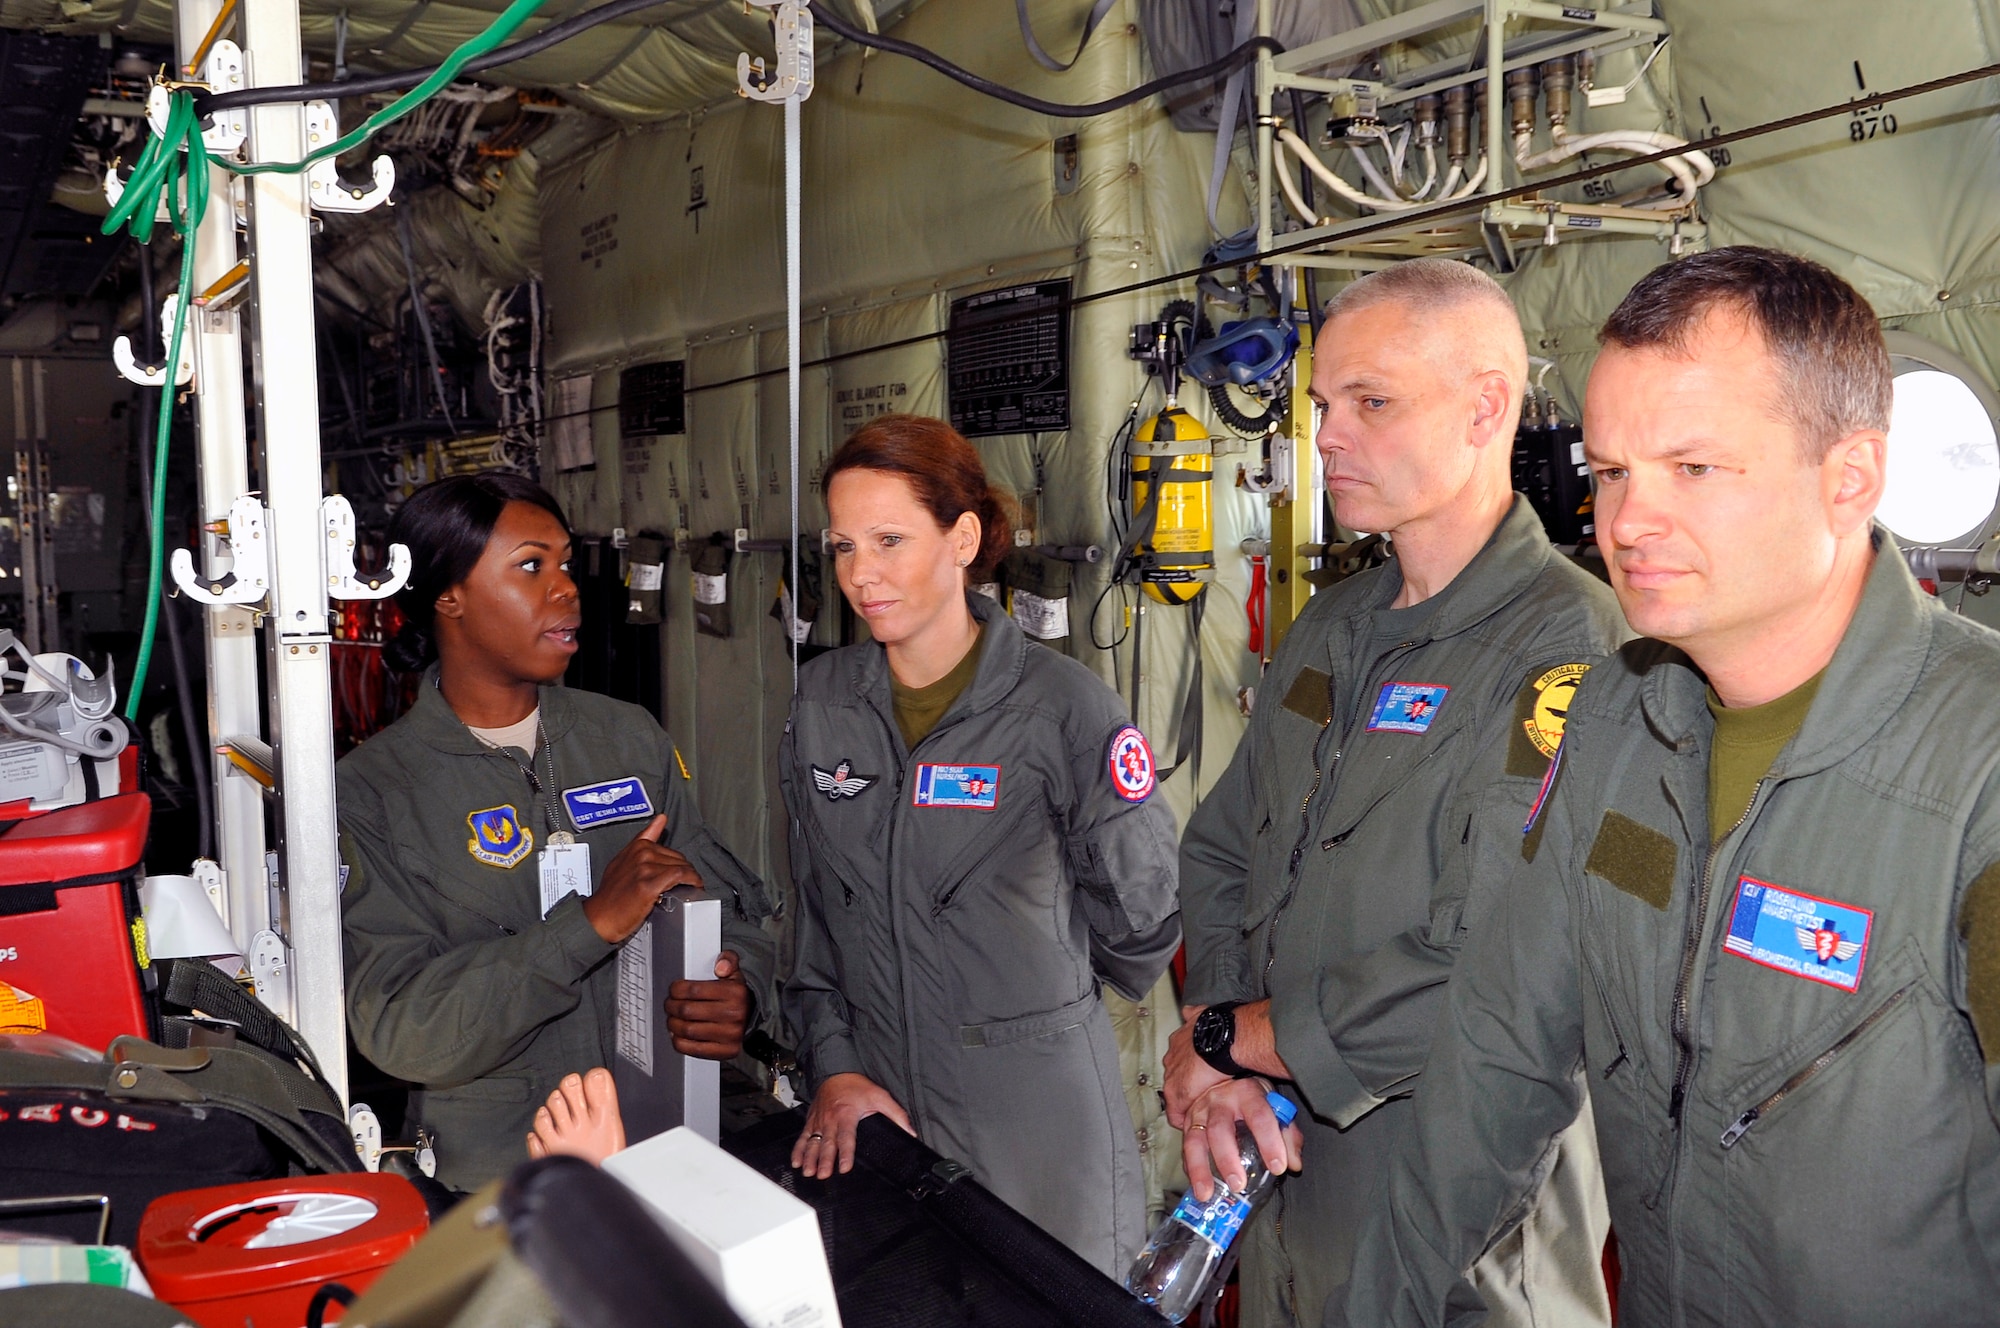 Staff Sgt. Ieshia Pledger, 86th Aeromedical Evacuation Squadron aircrew training flight instructor, explains the equipment and procedures used for AE missions to members of the Norwegian medical branch during a tour, Oct. 3, 2013, Ramstein Air Base, Germany. The medical branch visited the CASF, Landstuhl Regional Medical Center and other medical agencies to learn how the U.S. performs aeromedical evacuation and critical care aeromedical transport missions. (U.S. Air Force photo/Senior Airman Trevor Rhynes)